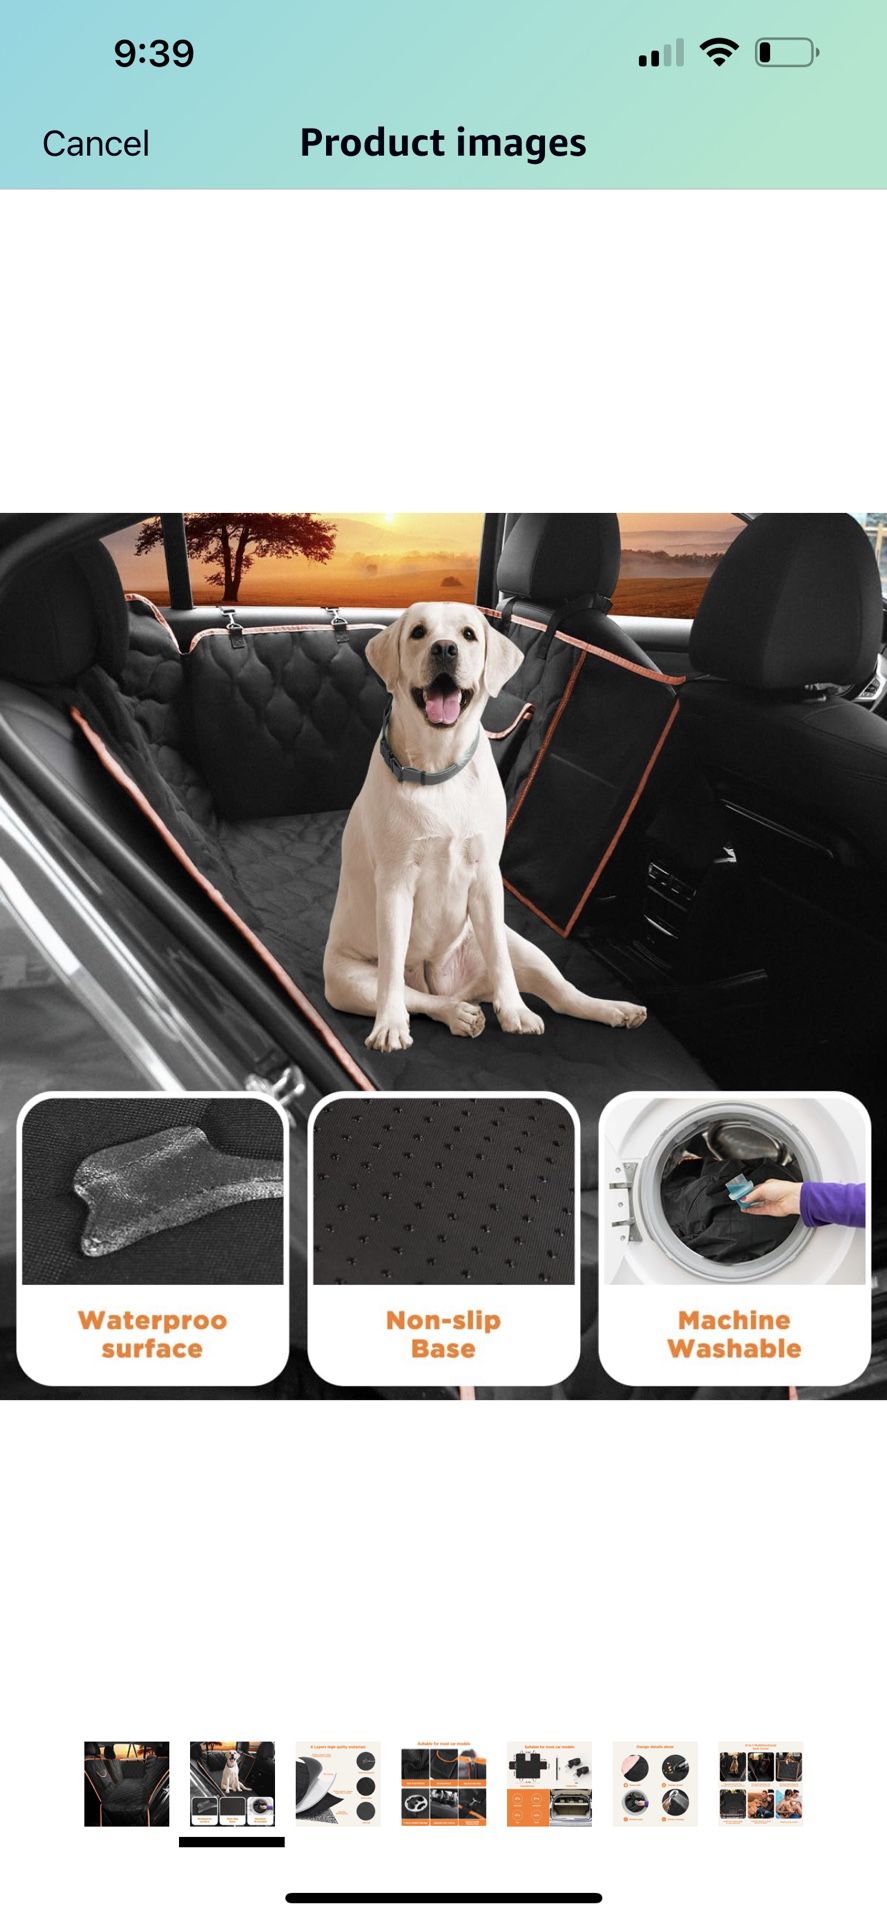 Waterproof Dog Car Seat Cover For Back Seat,Collapsible Scratchproof Dog Car Seat Cover,Nonslip Dog Seat Cover With Mesh Window,Storage Pocket,Side Fl